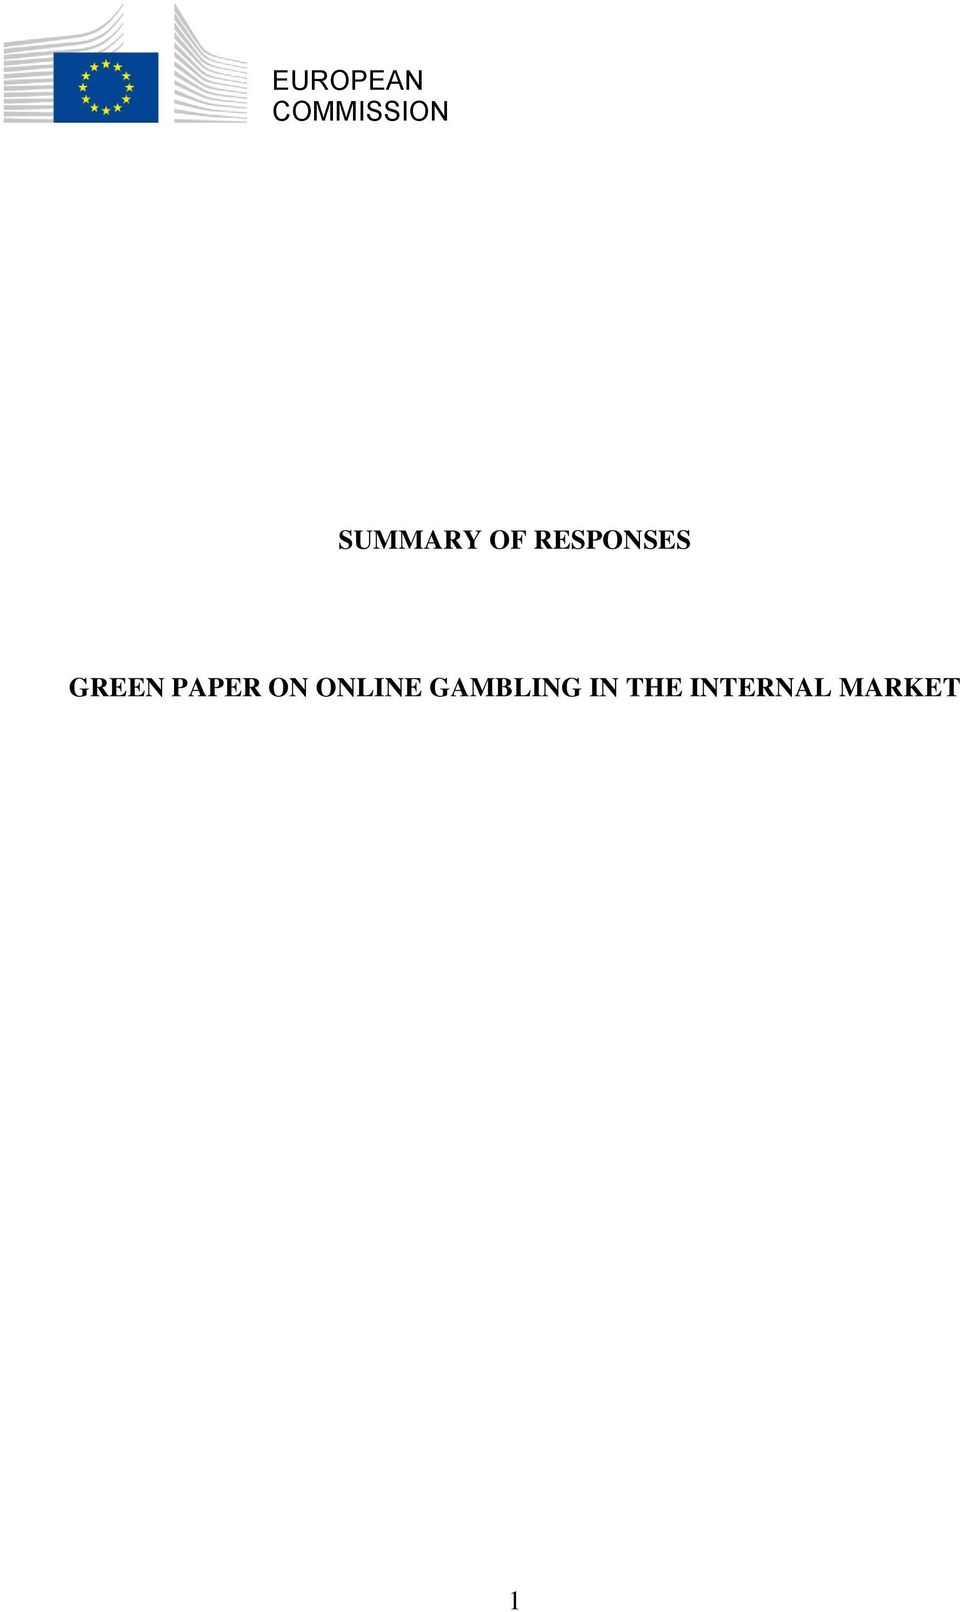 GREEN PAPER ON ONLINE